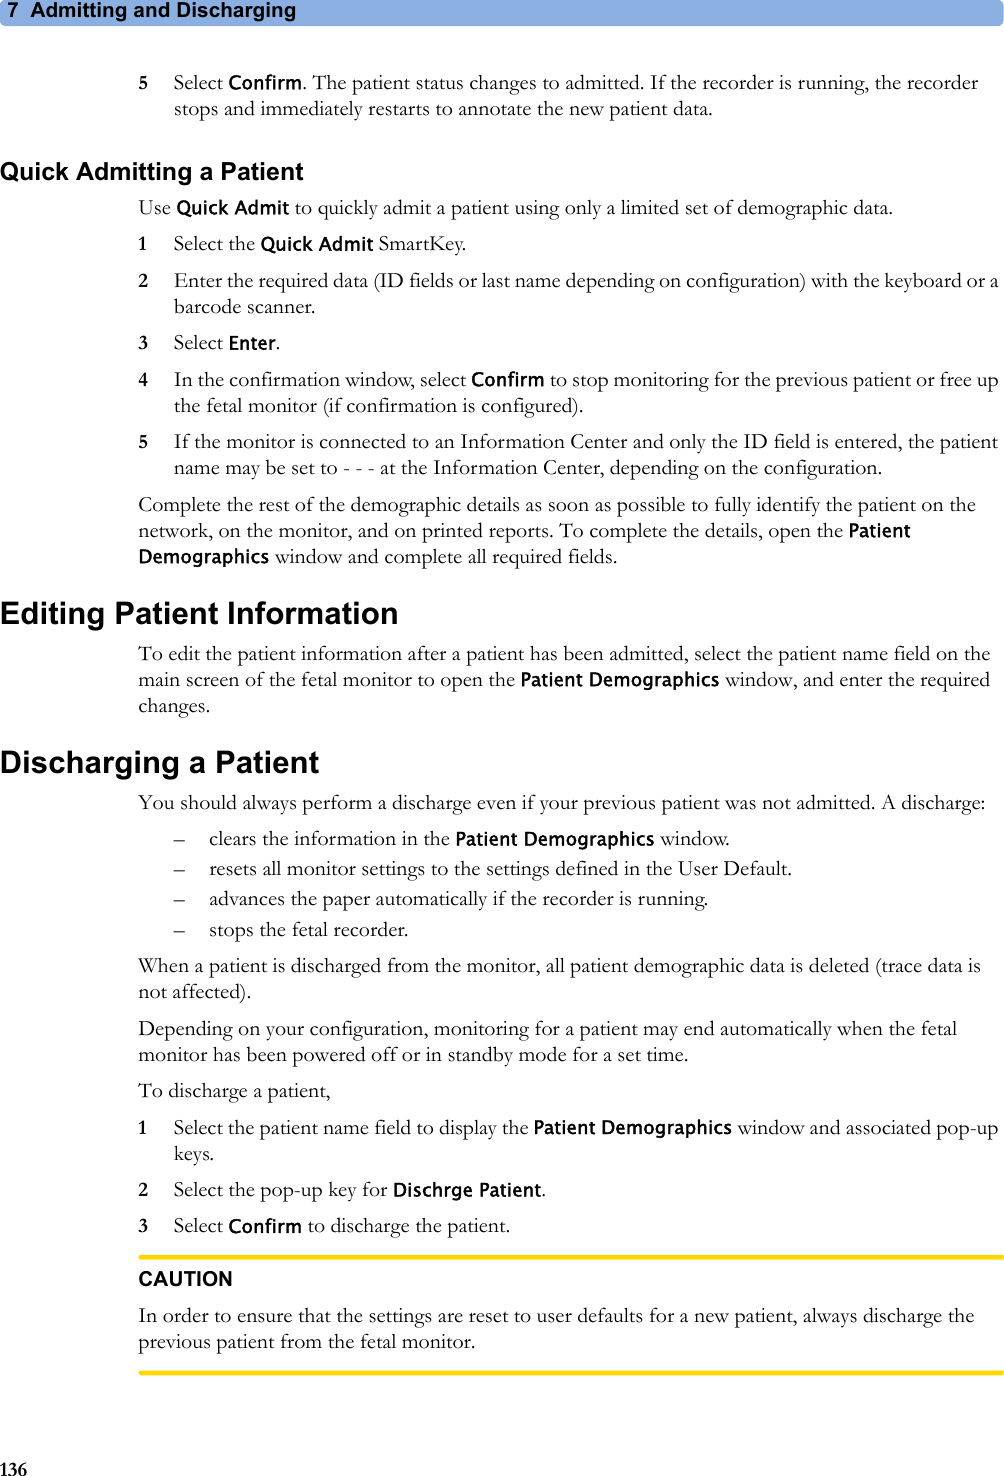 7 Admitting and Discharging1365Select Confirm. The patient status changes to admitted. If the recorder is running, the recorder stops and immediately restarts to annotate the new patient data.Quick Admitting a PatientUse Quick Admit to quickly admit a patient using only a limited set of demographic data.1Select the Quick Admit SmartKey.2Enter the required data (ID fields or last name depending on configuration) with the keyboard or a barcode scanner.3Select Enter.4In the confirmation window, select Confirm to stop monitoring for the previous patient or free up the fetal monitor (if confirmation is configured).5If the monitor is connected to an Information Center and only the ID field is entered, the patient name may be set to - - - at the Information Center, depending on the configuration.Complete the rest of the demographic details as soon as possible to fully identify the patient on the network, on the monitor, and on printed reports. To complete the details, open the Patient Demographics window and complete all required fields.Editing Patient InformationTo edit the patient information after a patient has been admitted, select the patient name field on the main screen of the fetal monitor to open the Patient Demographics window, and enter the required changes.Discharging a PatientYou should always perform a discharge even if your previous patient was not admitted. A discharge:– clears the information in the Patient Demographics window.– resets all monitor settings to the settings defined in the User Default.– advances the paper automatically if the recorder is running.– stops the fetal recorder.When a patient is discharged from the monitor, all patient demographic data is deleted (trace data is not affected).Depending on your configuration, monitoring for a patient may end automatically when the fetal monitor has been powered off or in standby mode for a set time.To discharge a patient,1Select the patient name field to display the Patient Demographics window and associated pop-up keys.2Select the pop-up key for Dischrge Patient.3Select Confirm to discharge the patient.CAUTIONIn order to ensure that the settings are reset to user defaults for a new patient, always discharge the previous patient from the fetal monitor.